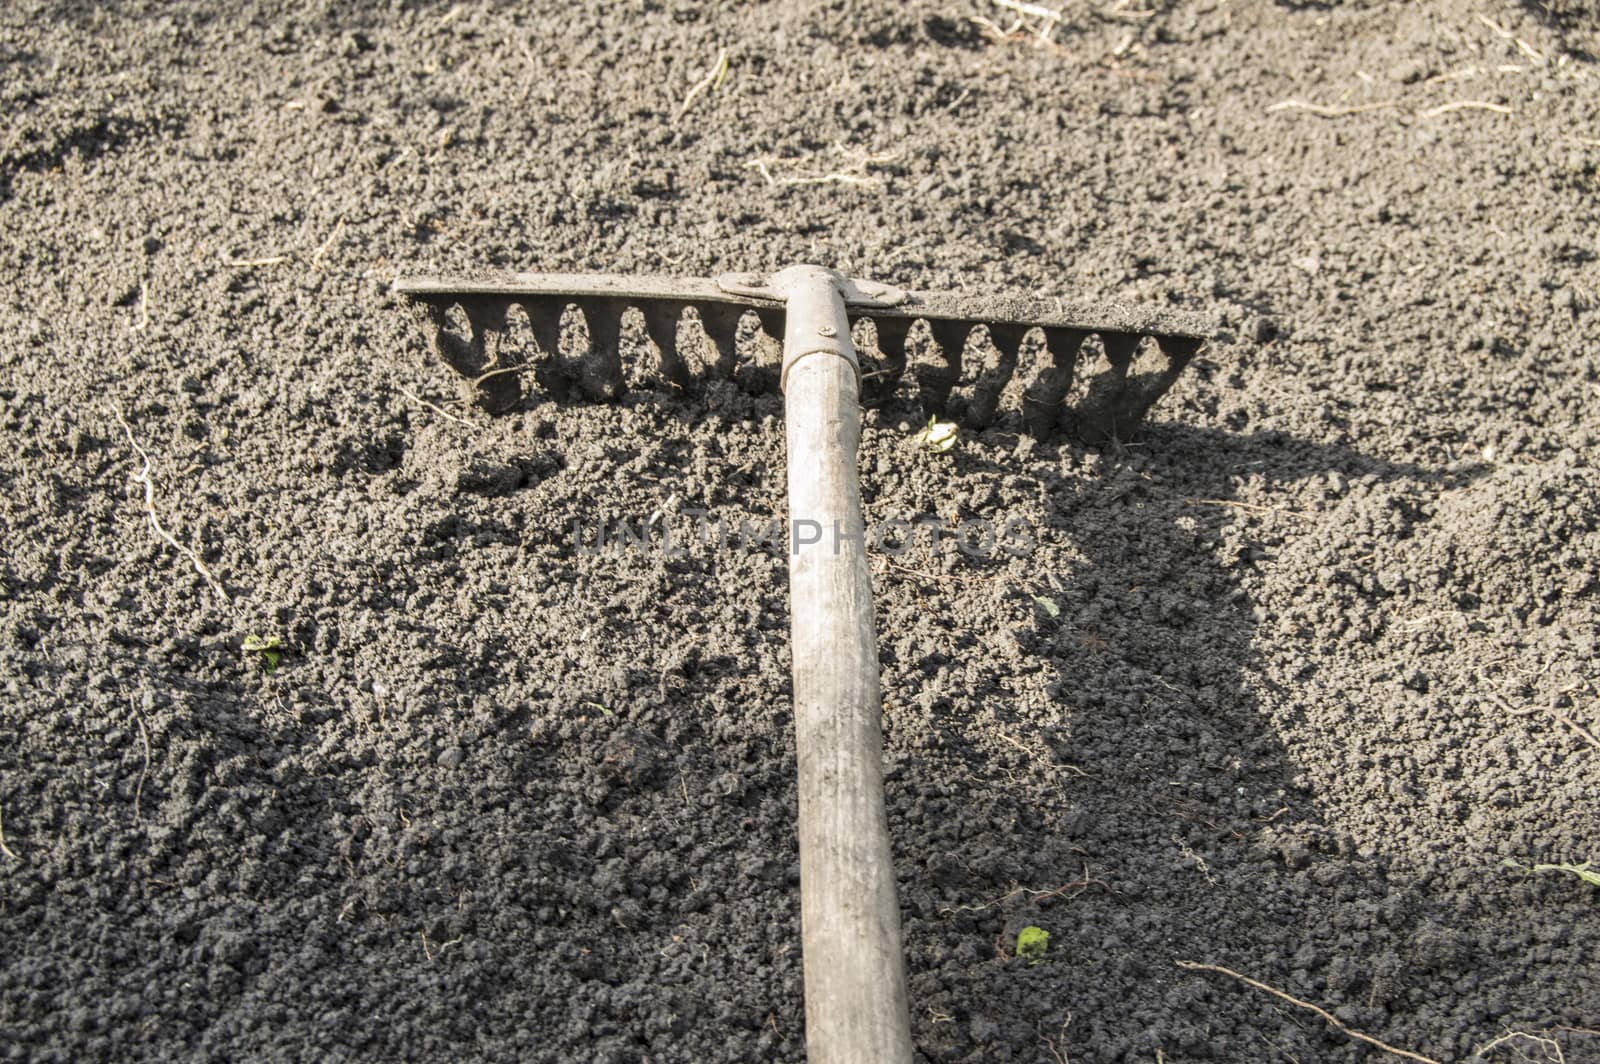 Garden rakes lying on the ploughed black soil for planting - the concept of gardening and farming, spring work in the garden.